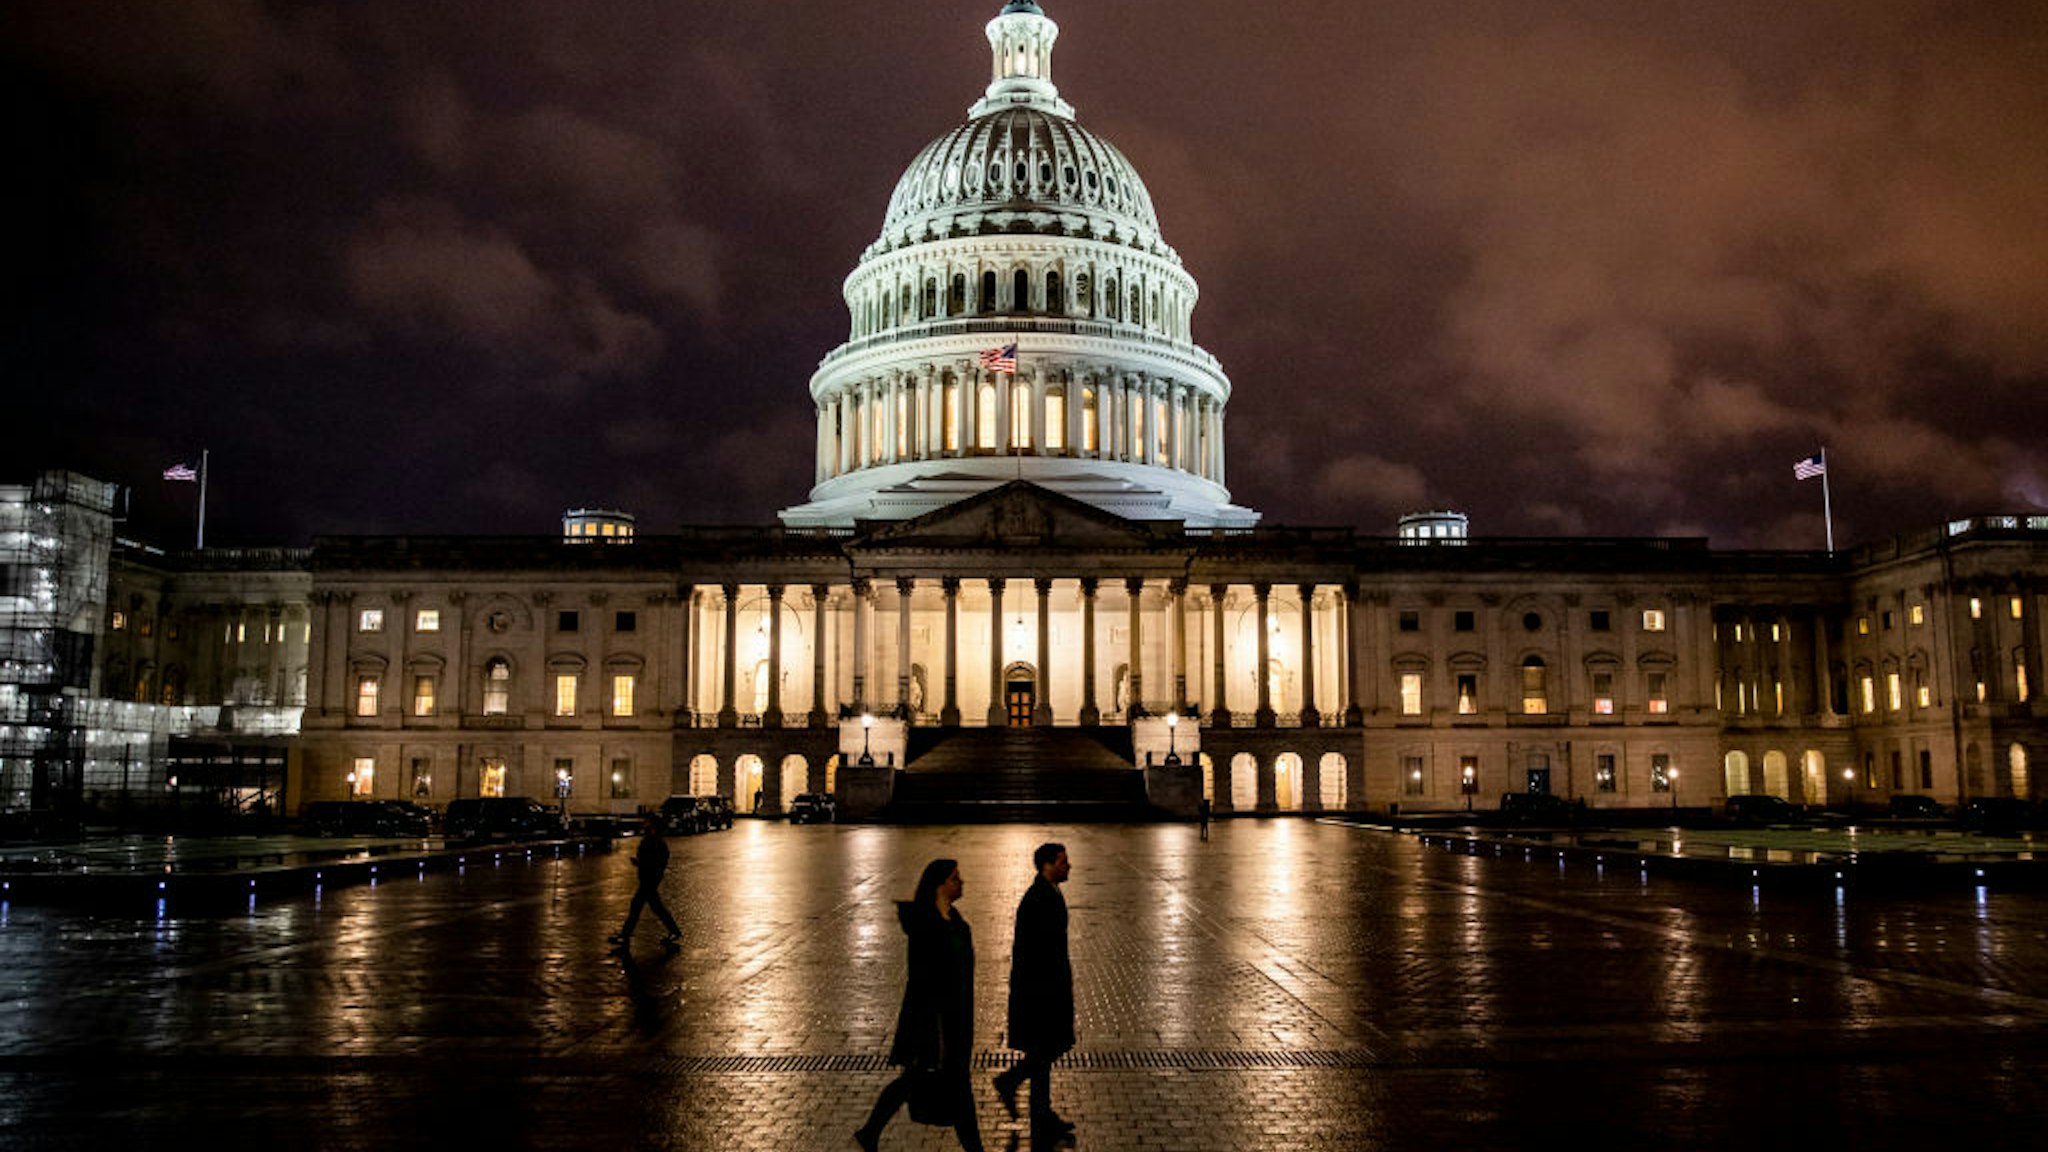 WASHINGTON, DC - DECEMBER 17: People walk along the east front plaza of the US Capitol as night falls on December 17, 2019 in Washington, DC. The House Rules Committee is holding a full committee hearing to set guidelines for the upcoming debate and vote on the two Articles of Impeachment of President Trump in the House of Representatives.